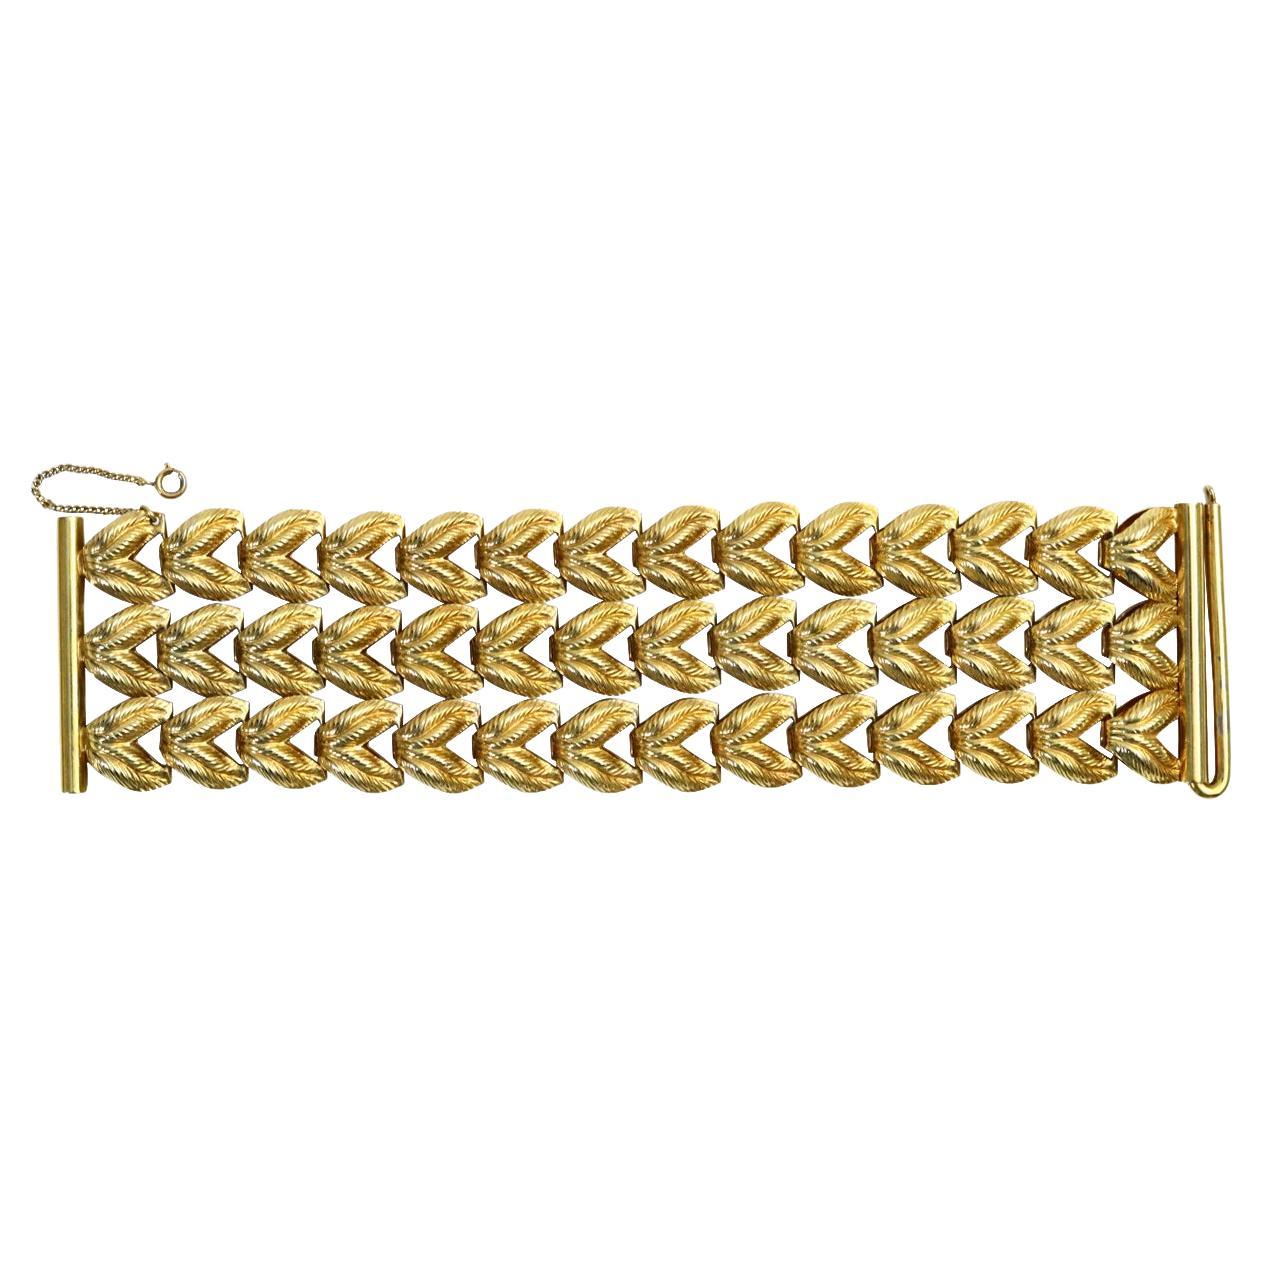 Vintage Napier Gold Tone 3 Row Bracelet Circa 1960s.  One of teh older Napier bracelets.  There are three rows of what is like braided metal which attach to a bar on either end.  Each line of braid is independent of the other so you will have lots